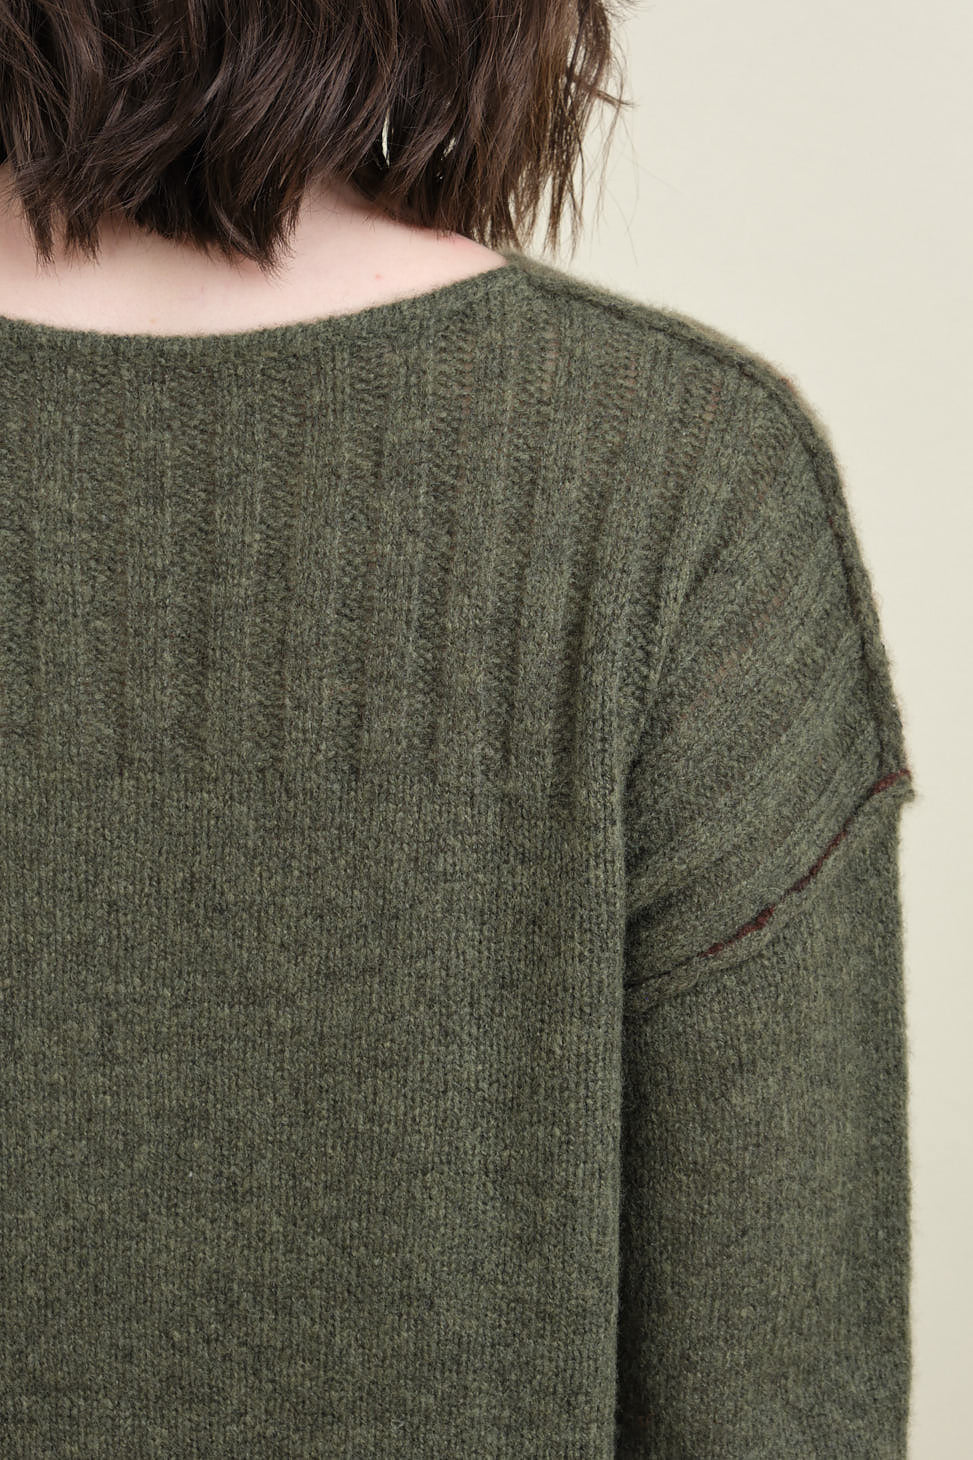 Shoulder detailing on Dreamy Pullover in Moss